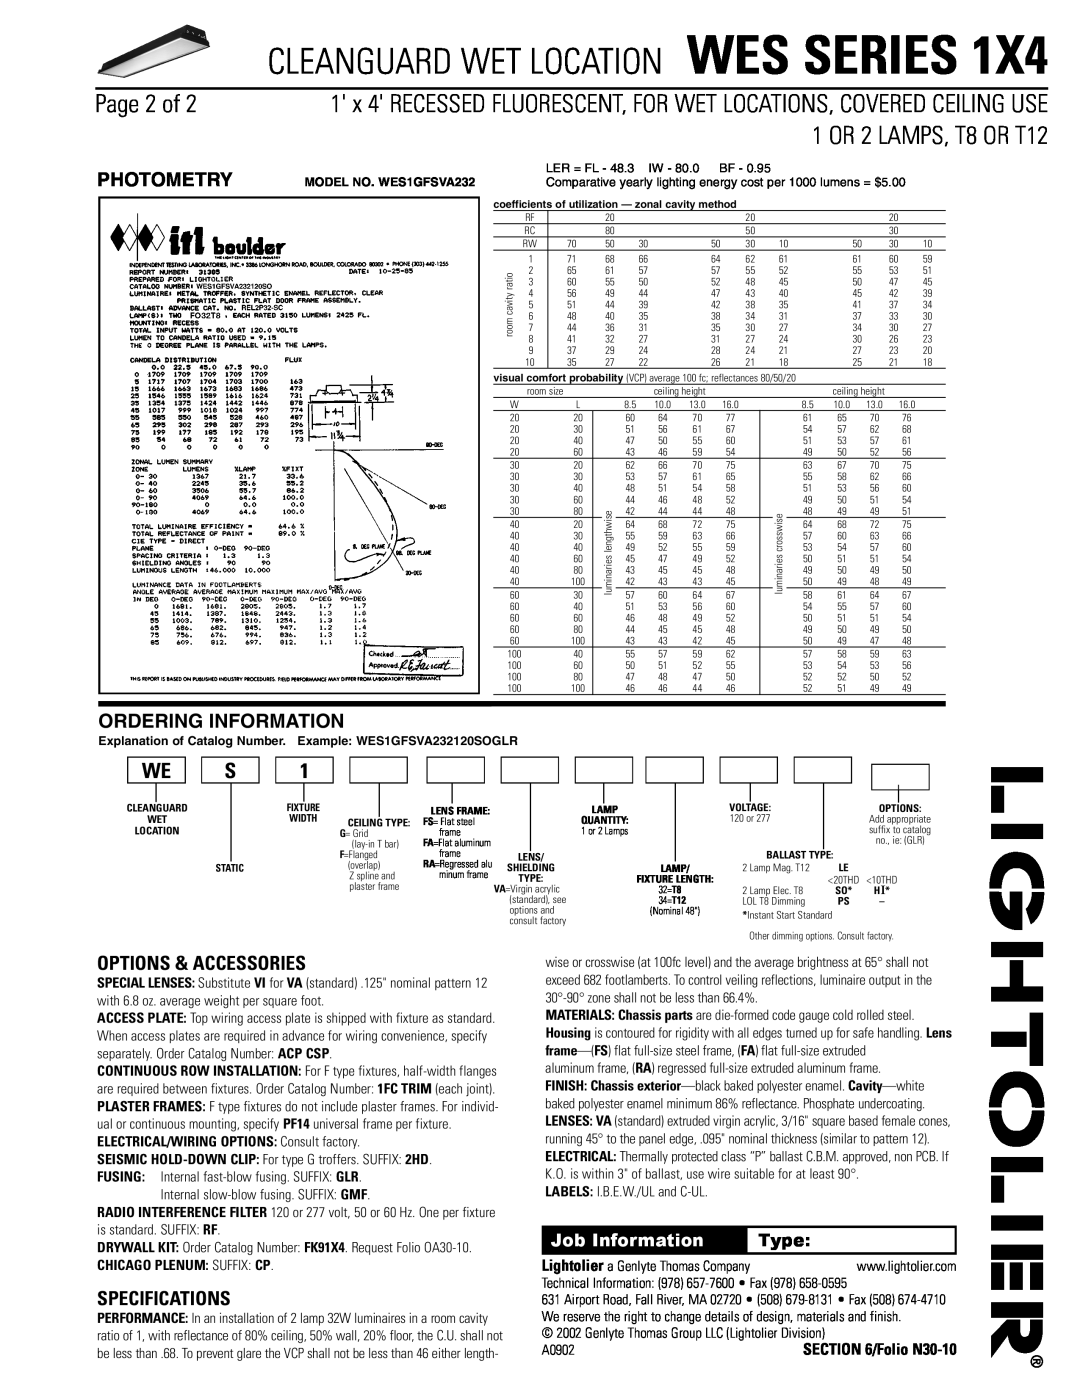 Lightolier WES SERIES 1X4 Page 2 of, Options & Accessories, Specifications, Cleanguard Wet Location Wes Series, Photometry 